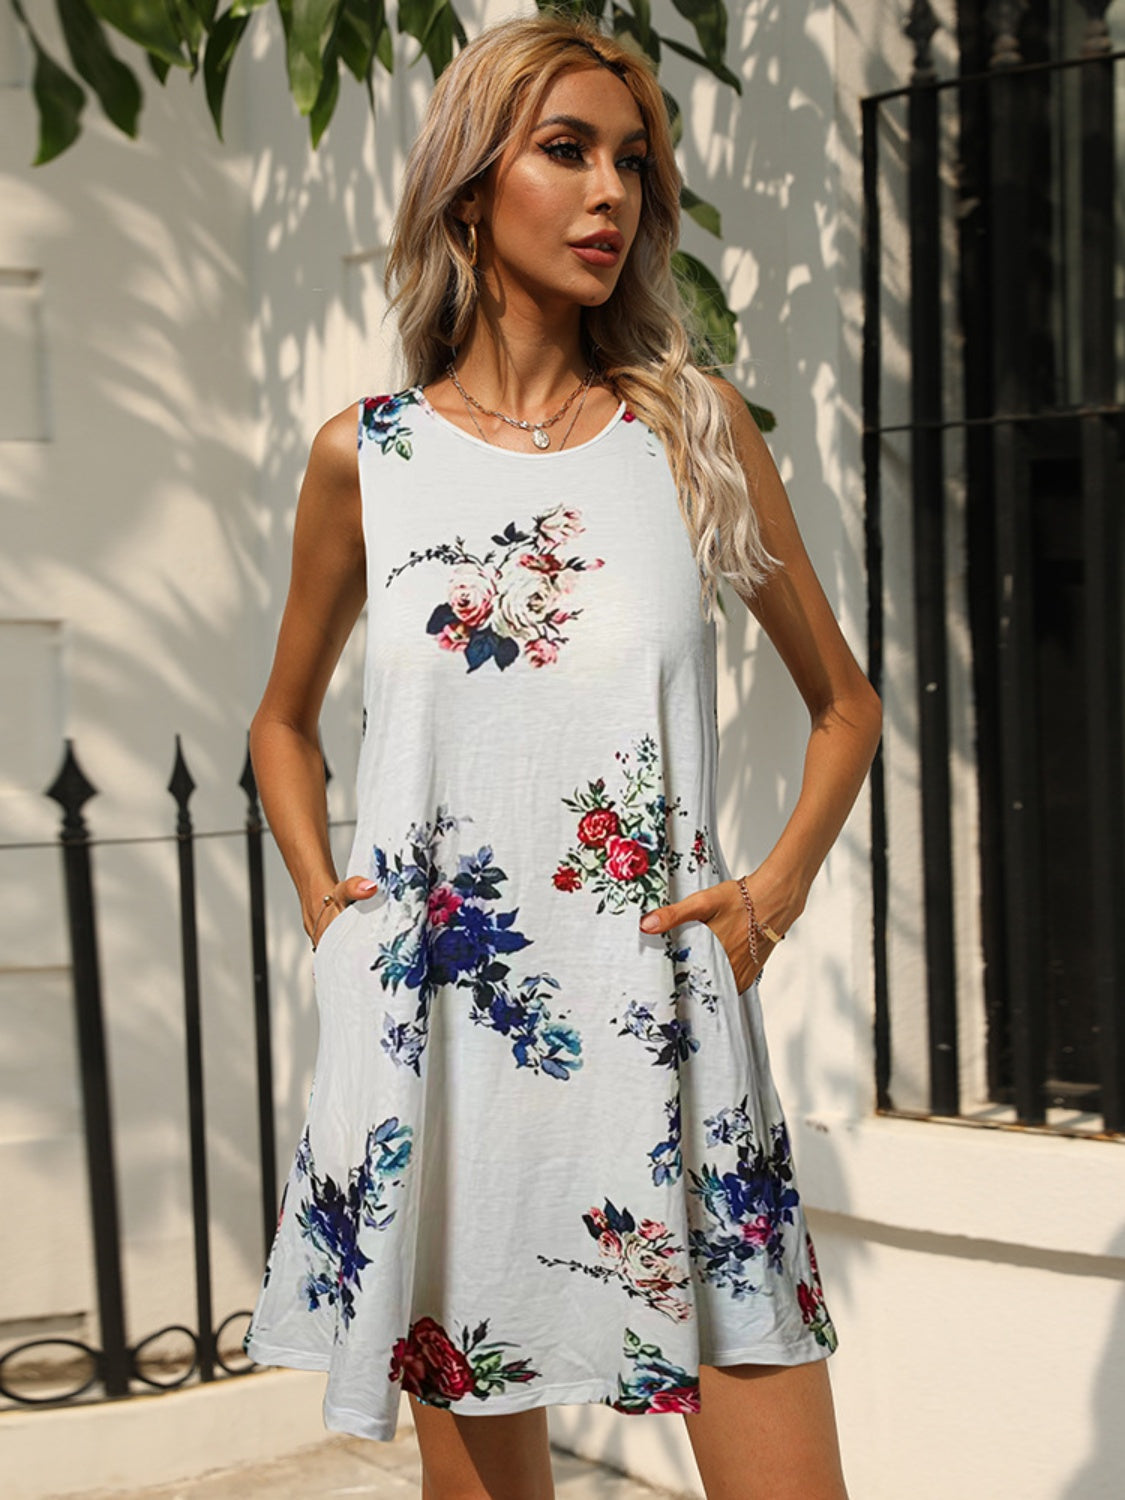 Printed Round Neck Sleeveless Dress with Pockets- ONLINE ONLY 2-7 DAY SHIP